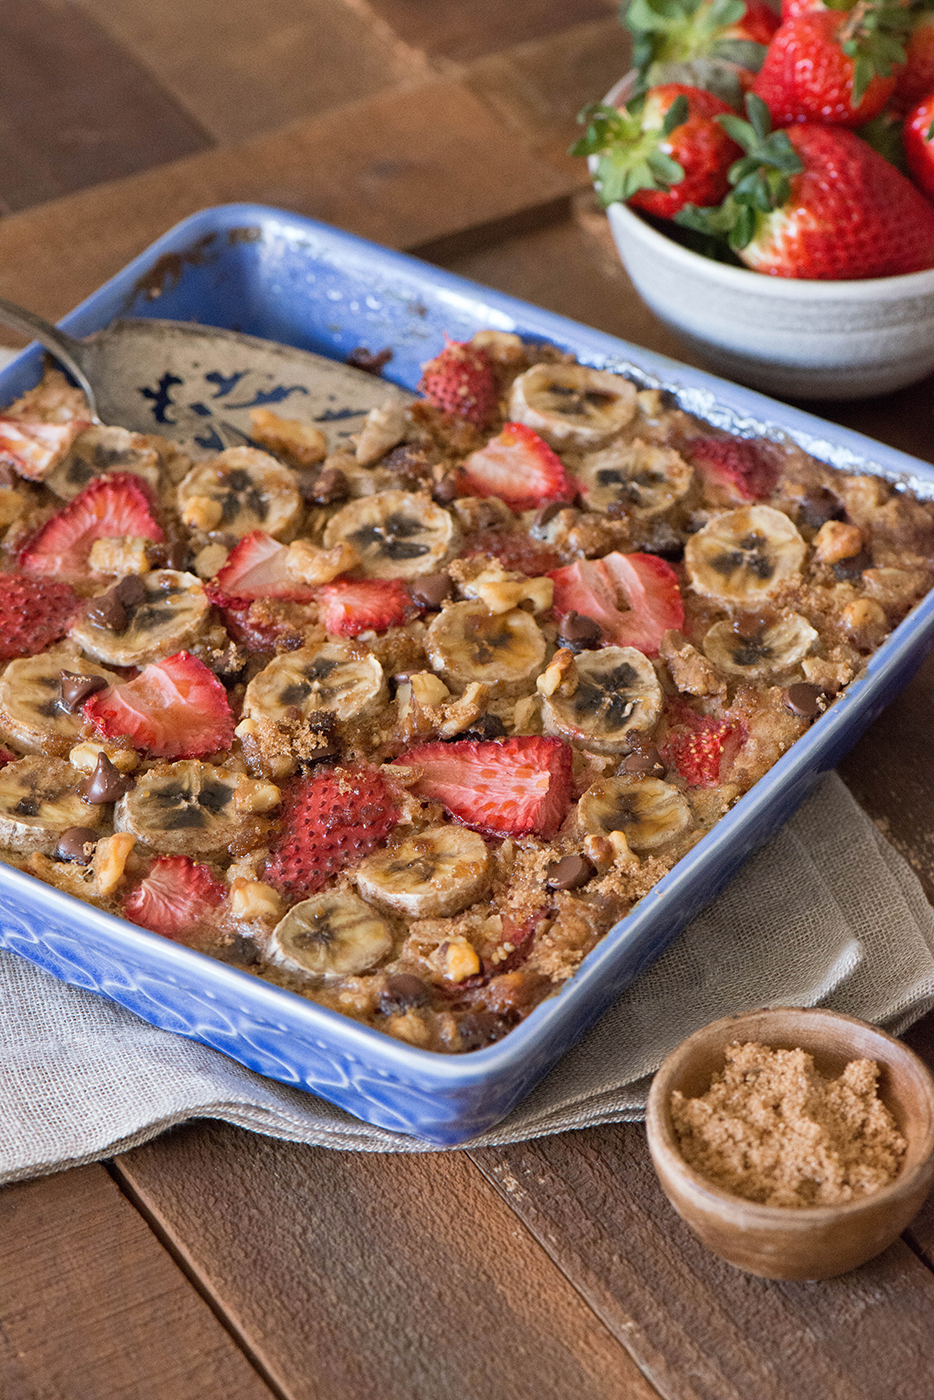 Oatmeal Bake with Strawberries and Bananas